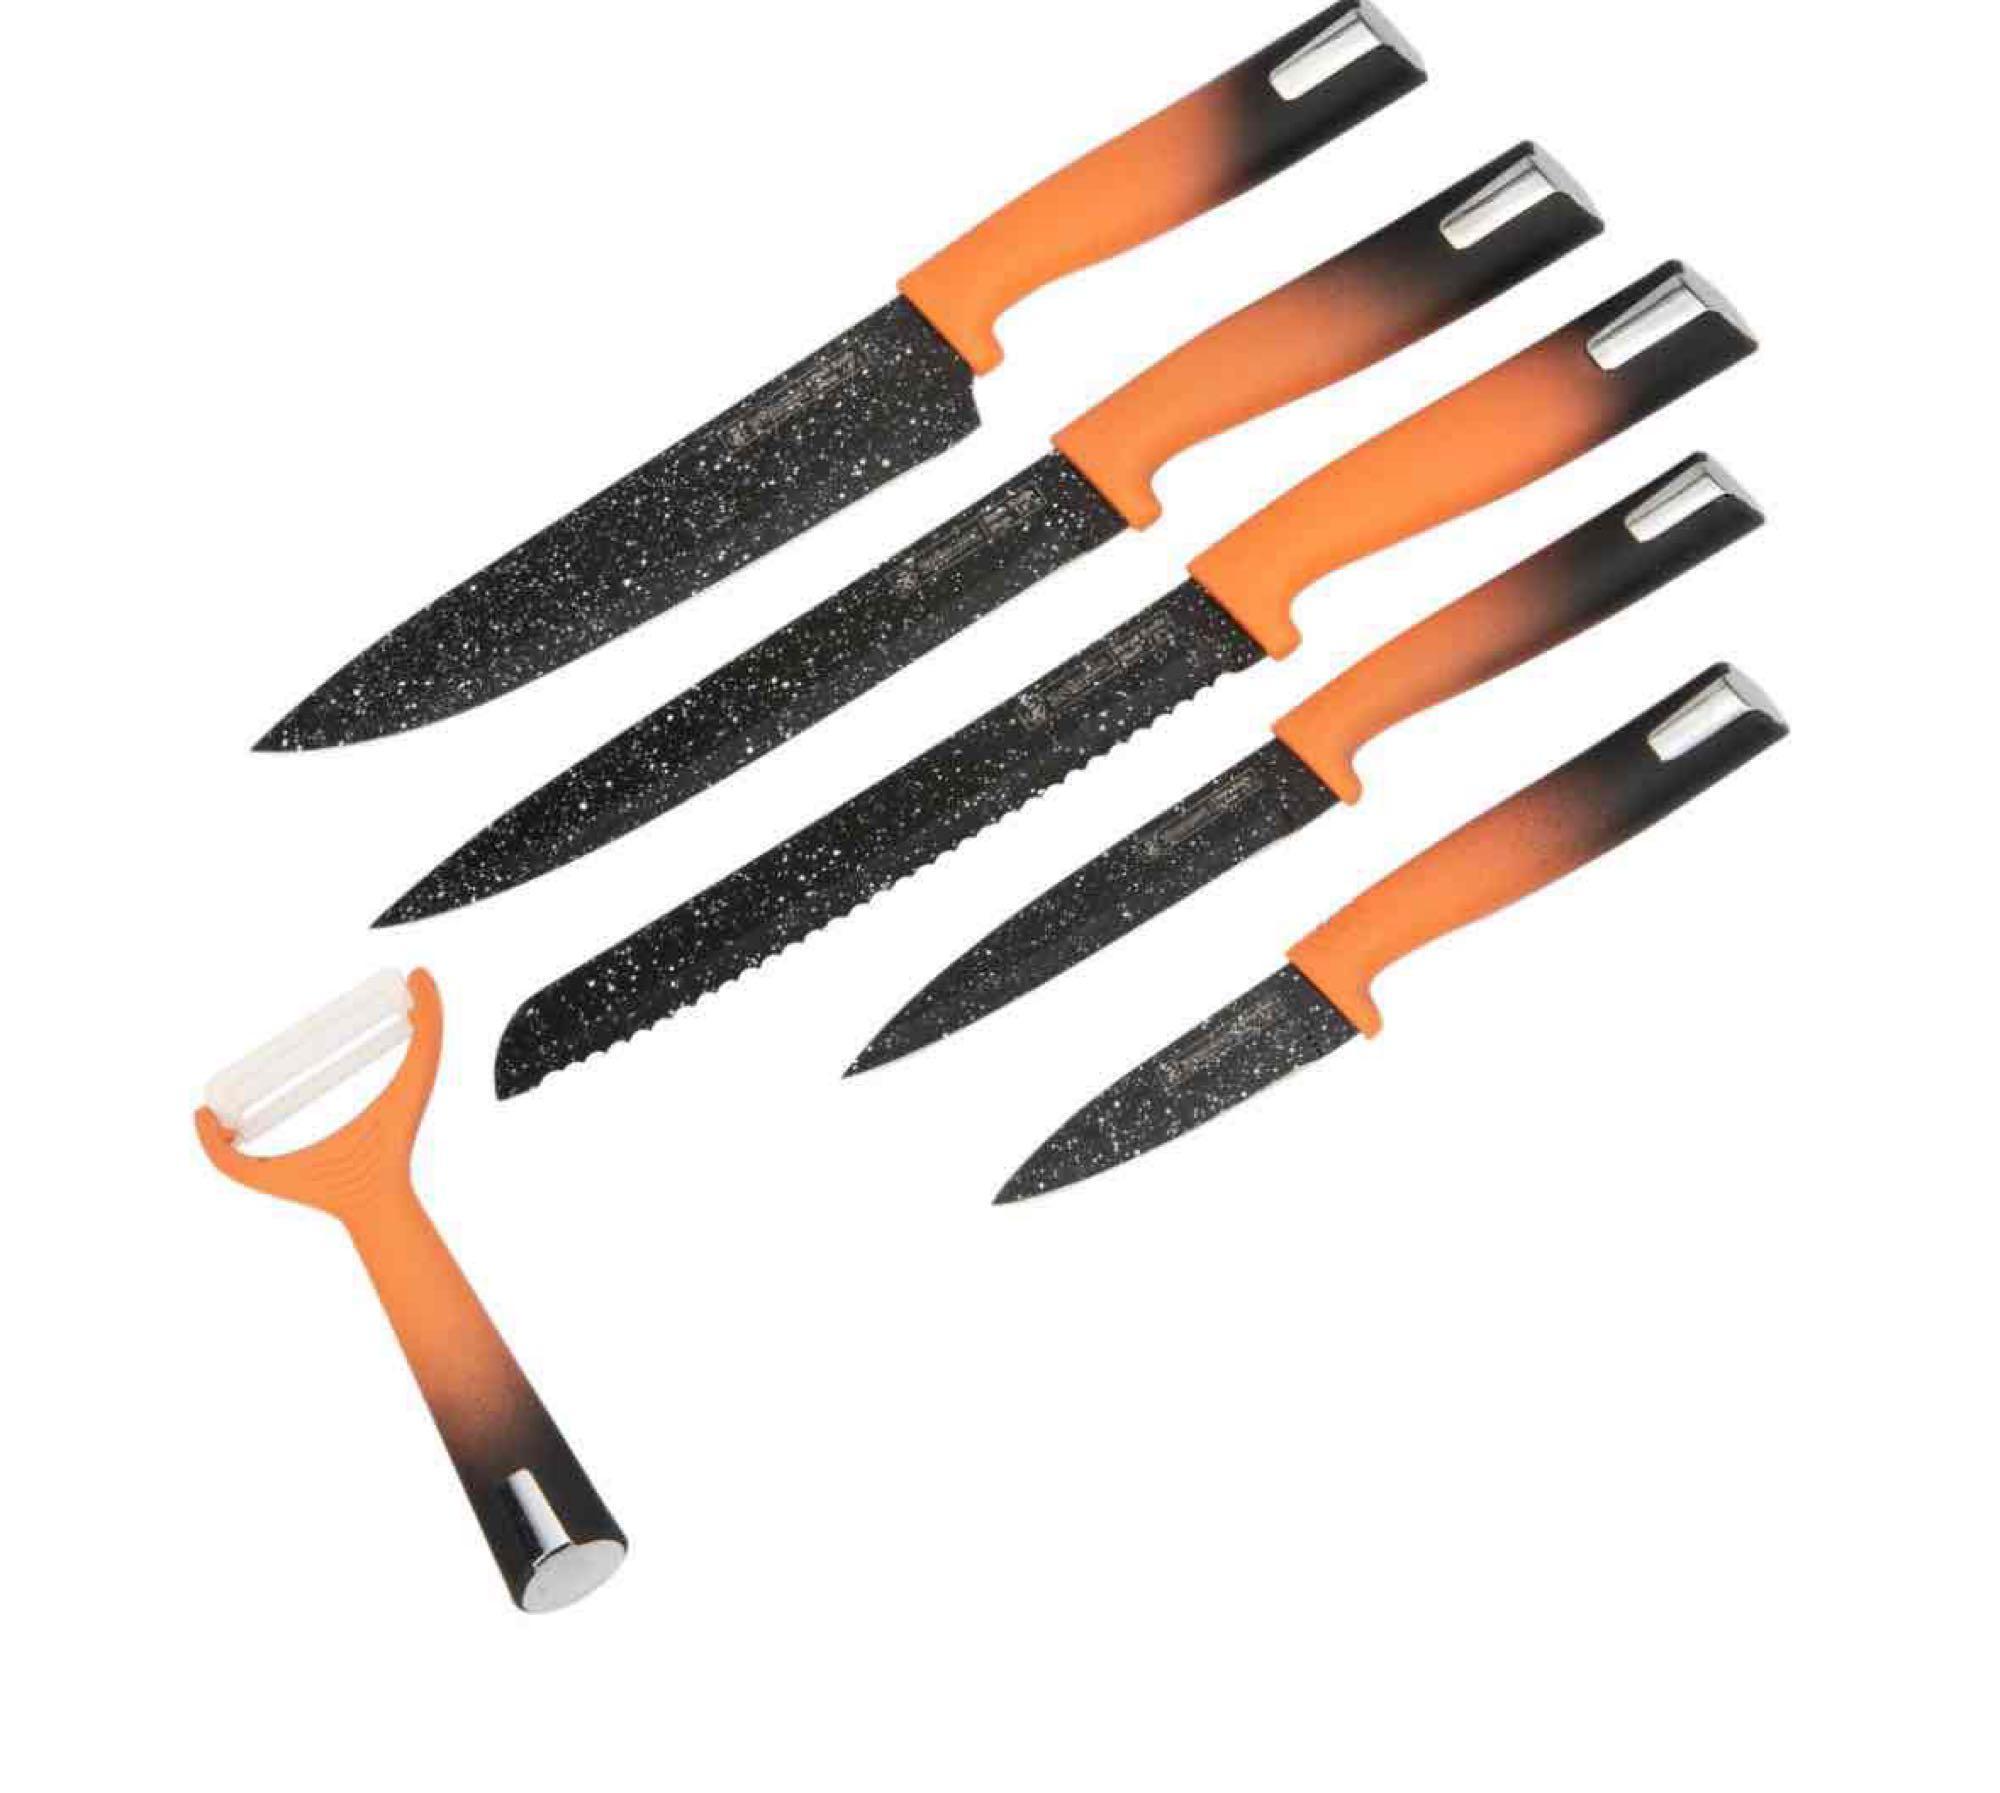  Kitchen King - 6 Piece Professional Quality Chef